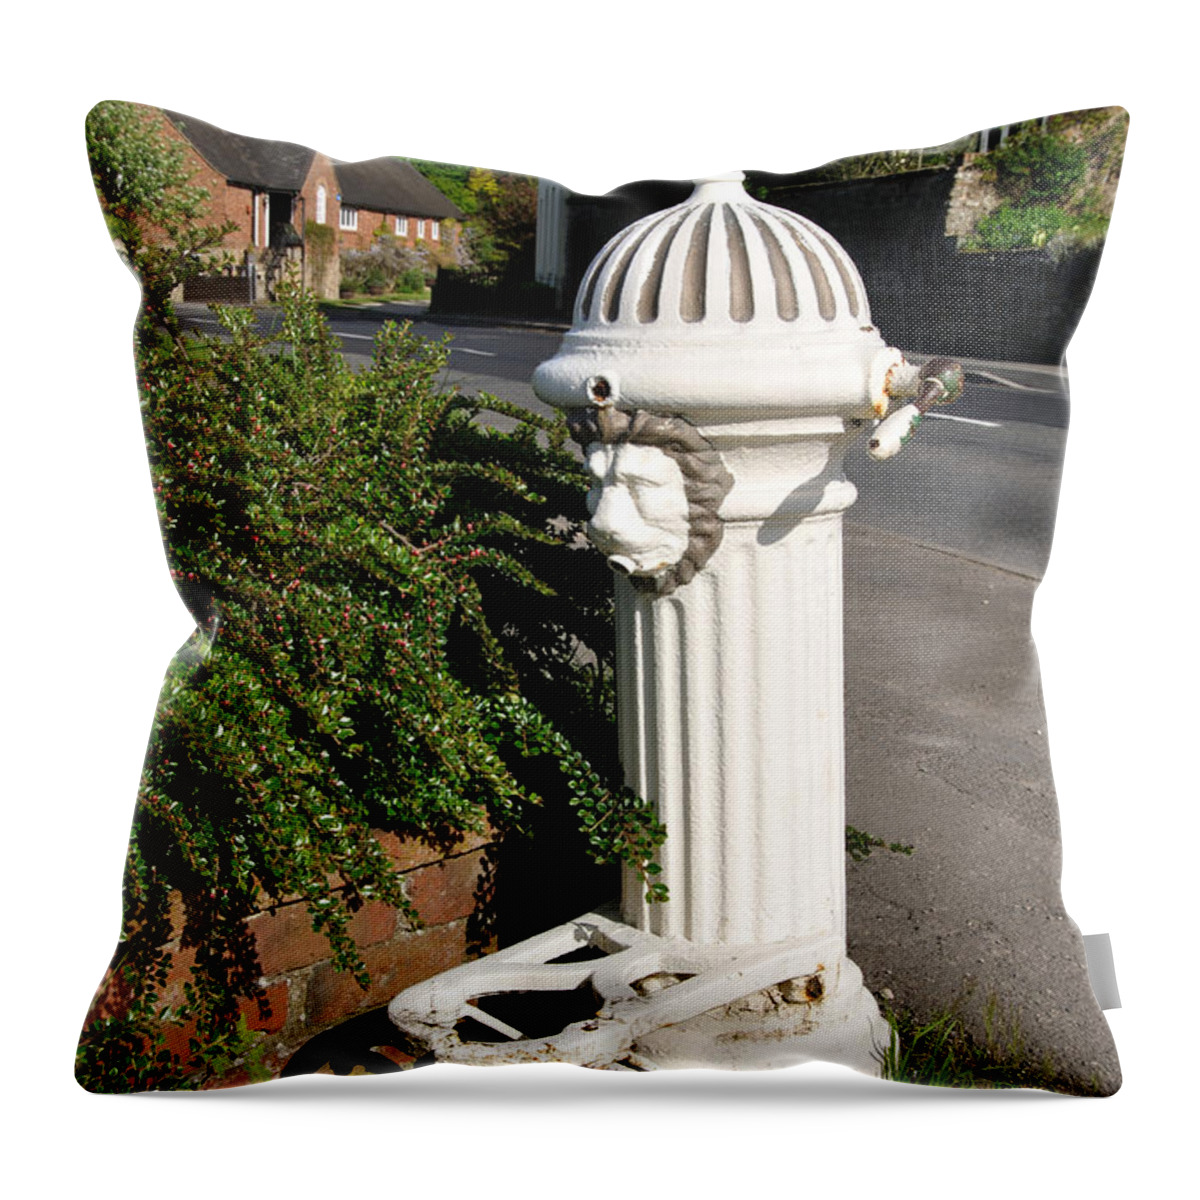 Europe Throw Pillow featuring the photograph Ticknall Village Water Tap by Rod Johnson